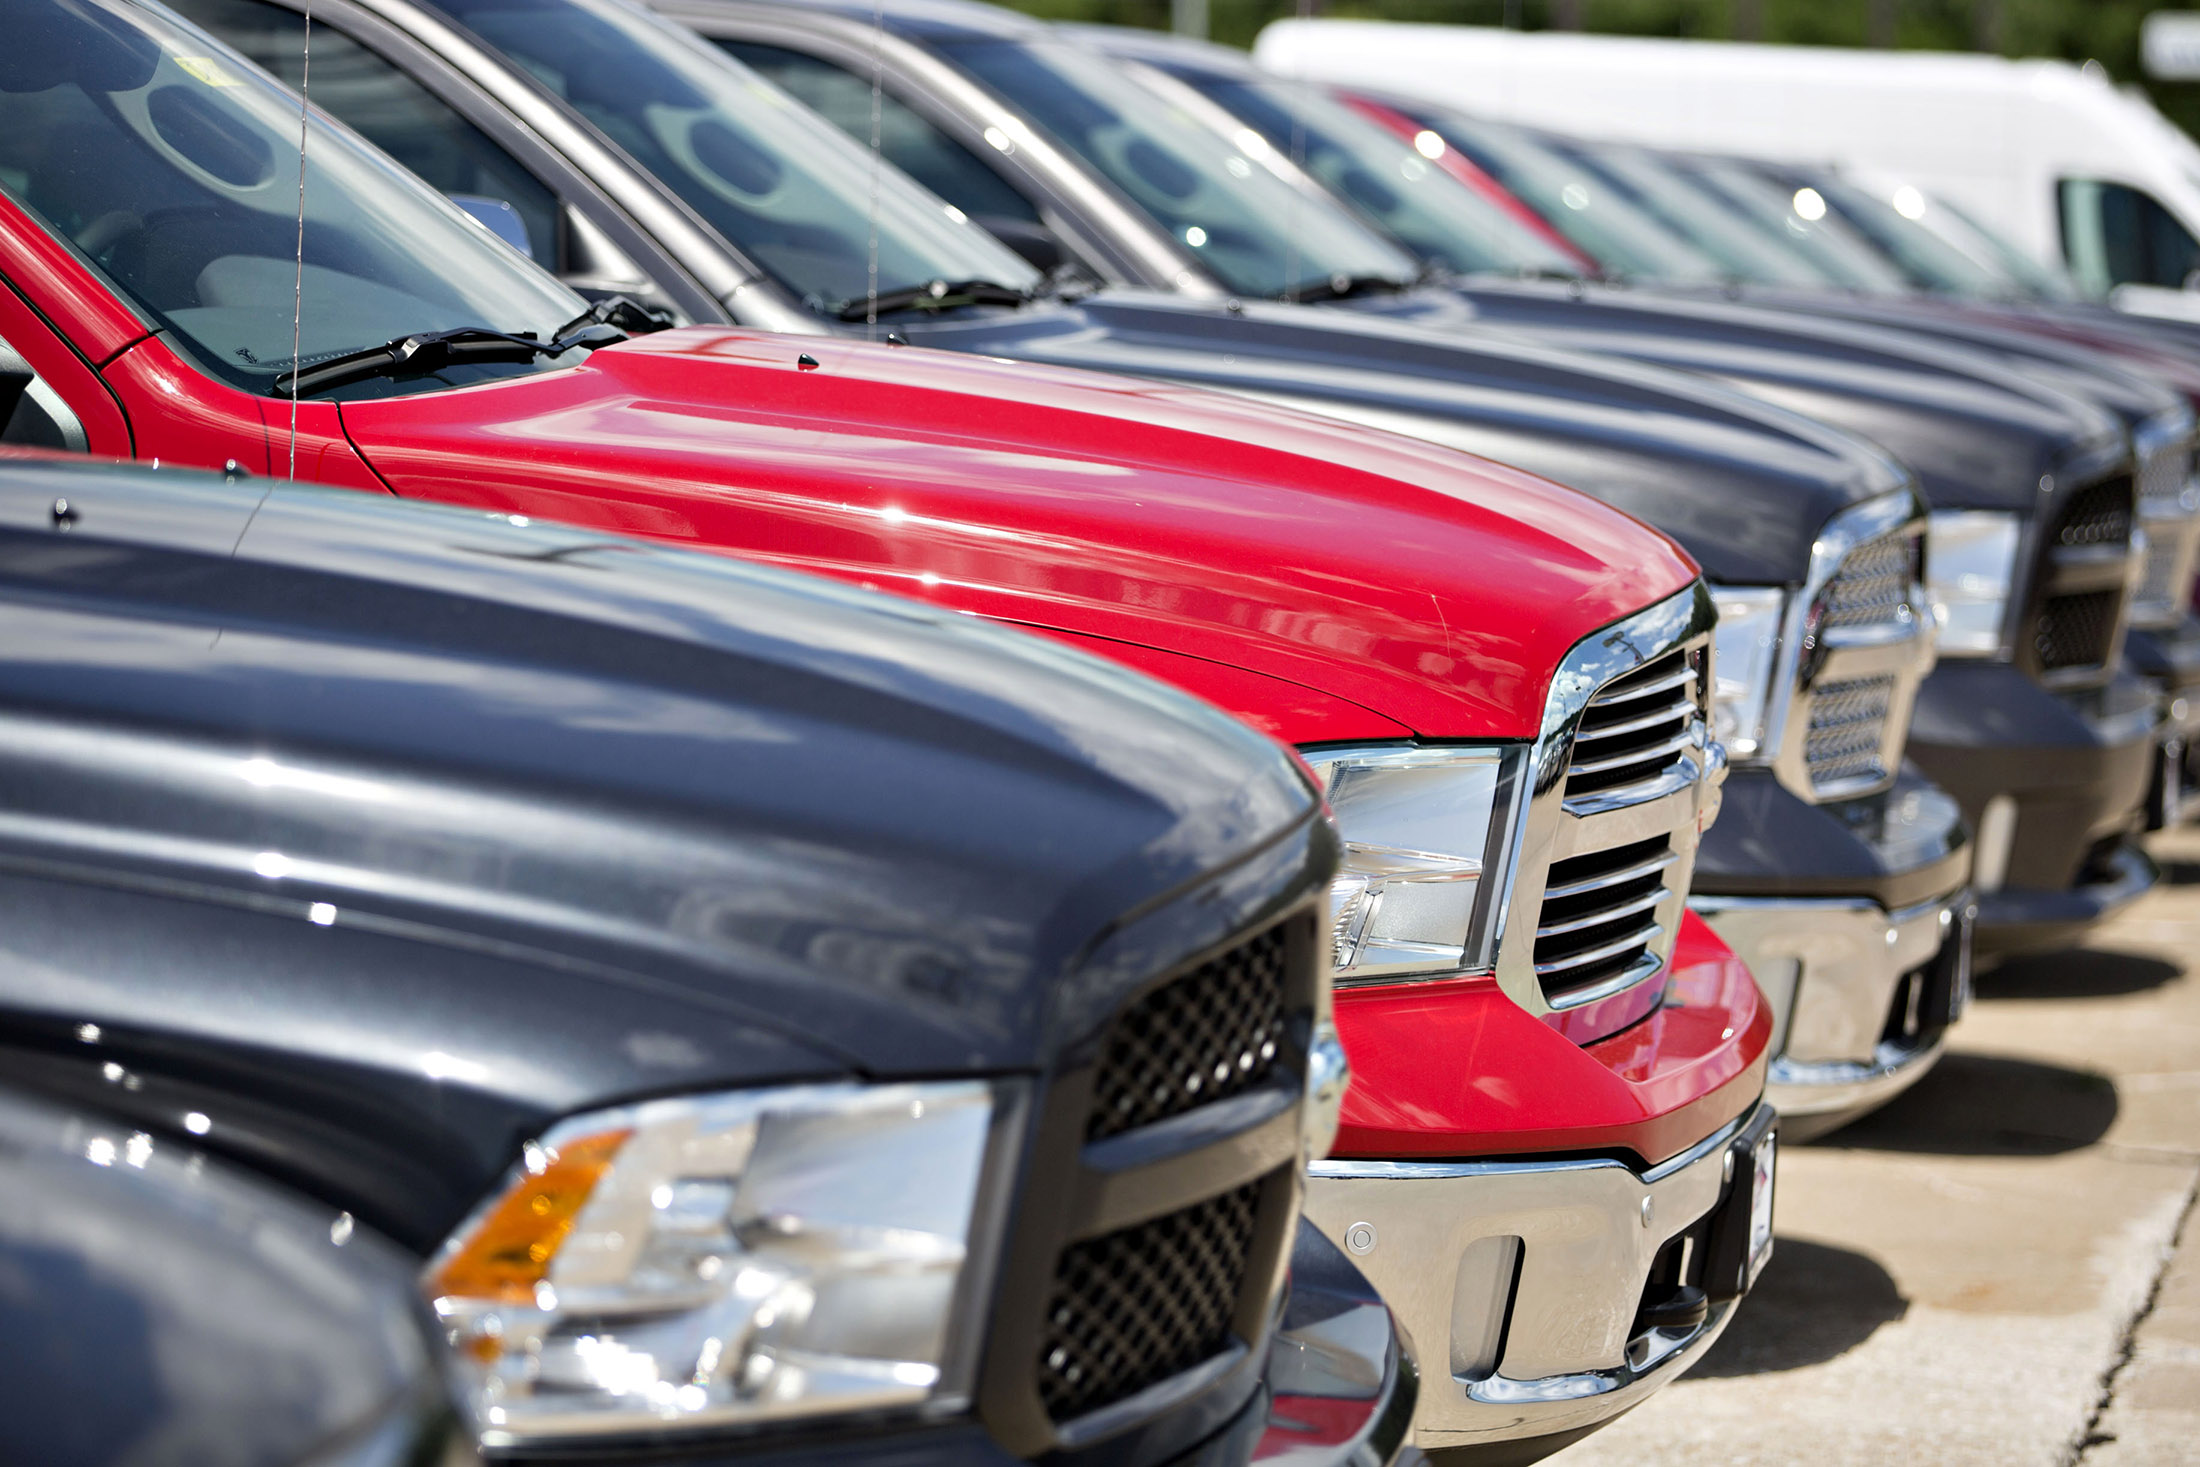 A row of Fiat Chrysler Automobiles (FCA) 2017 Dodge Ram trucks are displayed for sale at a car dealership in Moline, Ill.